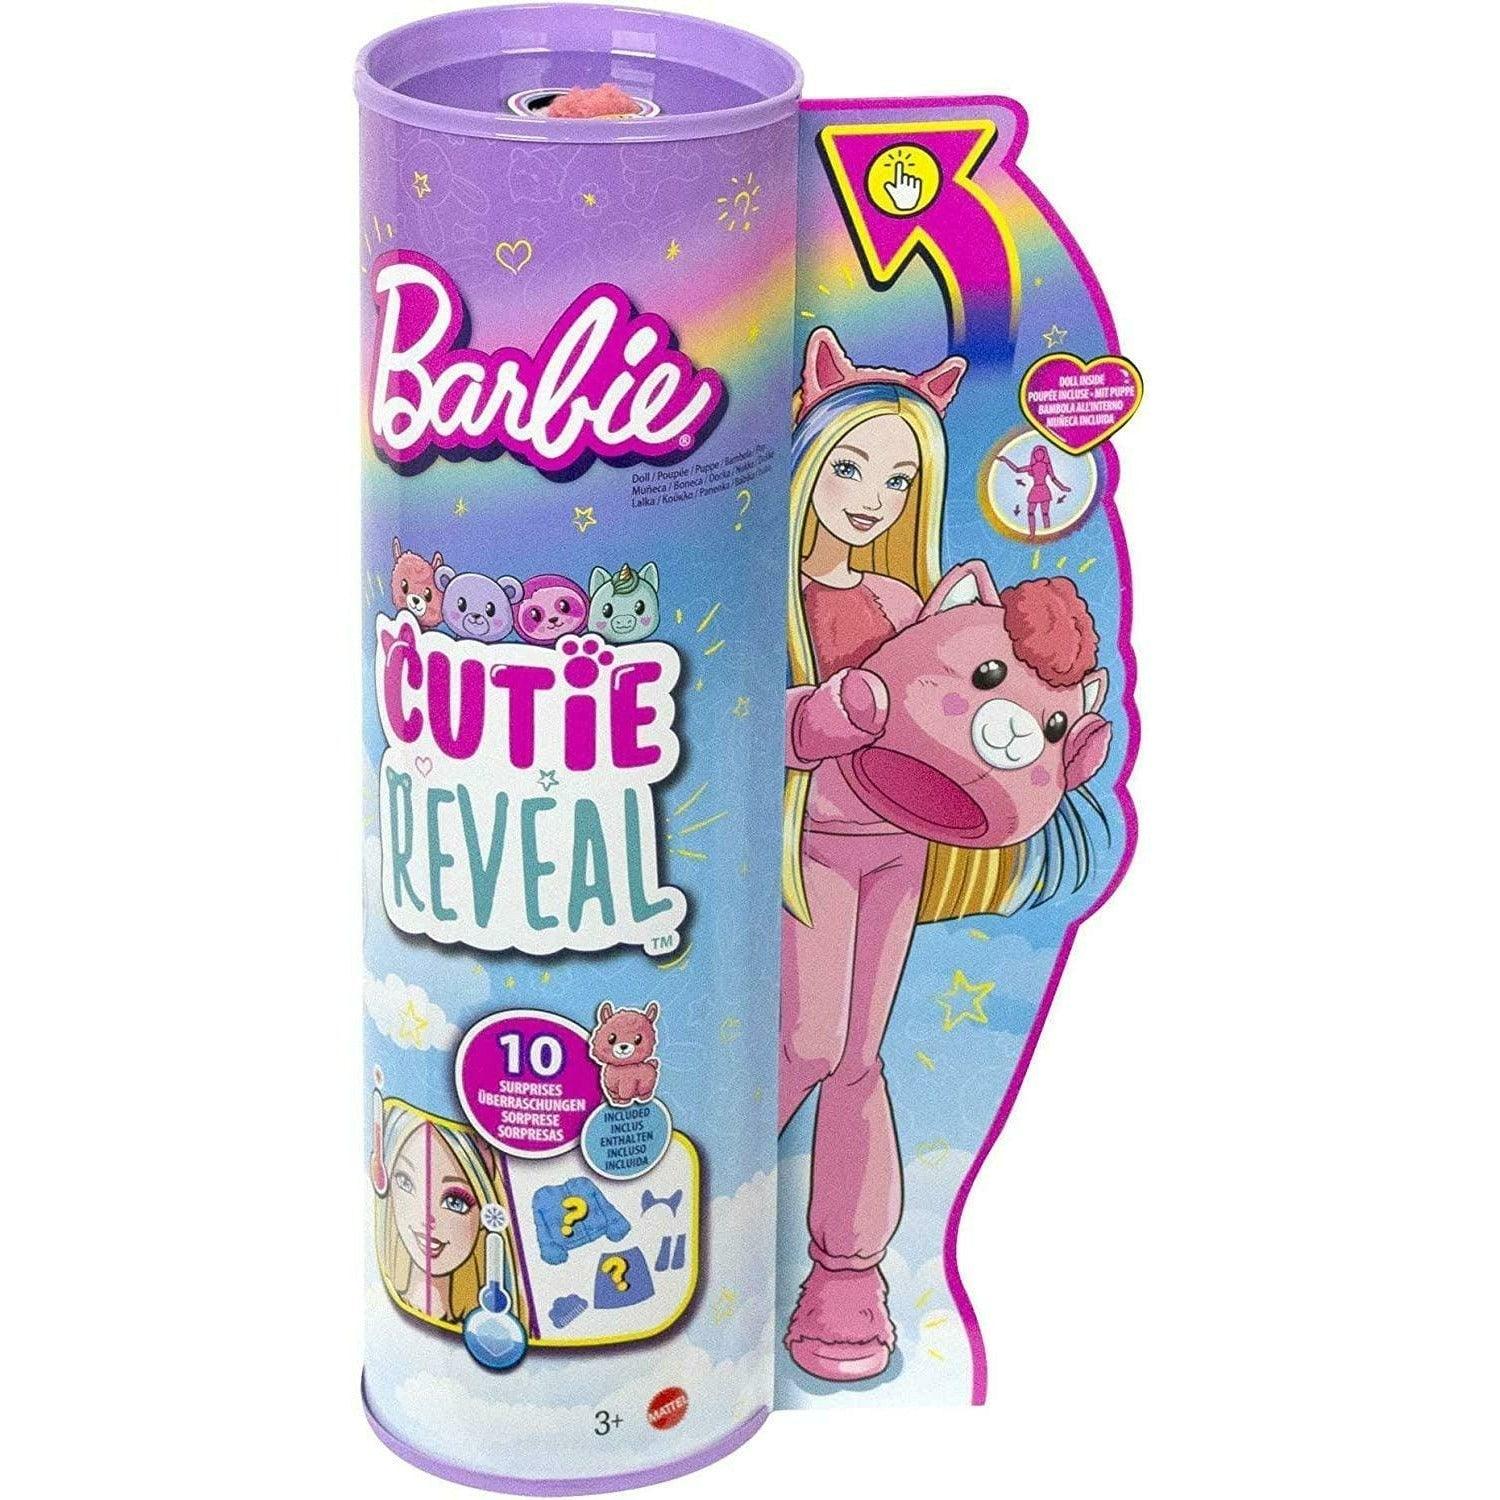 Barbie Cutie Reveal Fantasy Series Doll With Llama Plush Costume & 10 Surprises Including Mini Pet & Color Change - BumbleToys - 5-7 Years, Barbie, Fashion Dolls & Accessories, Girls, OXE, Pre-Order